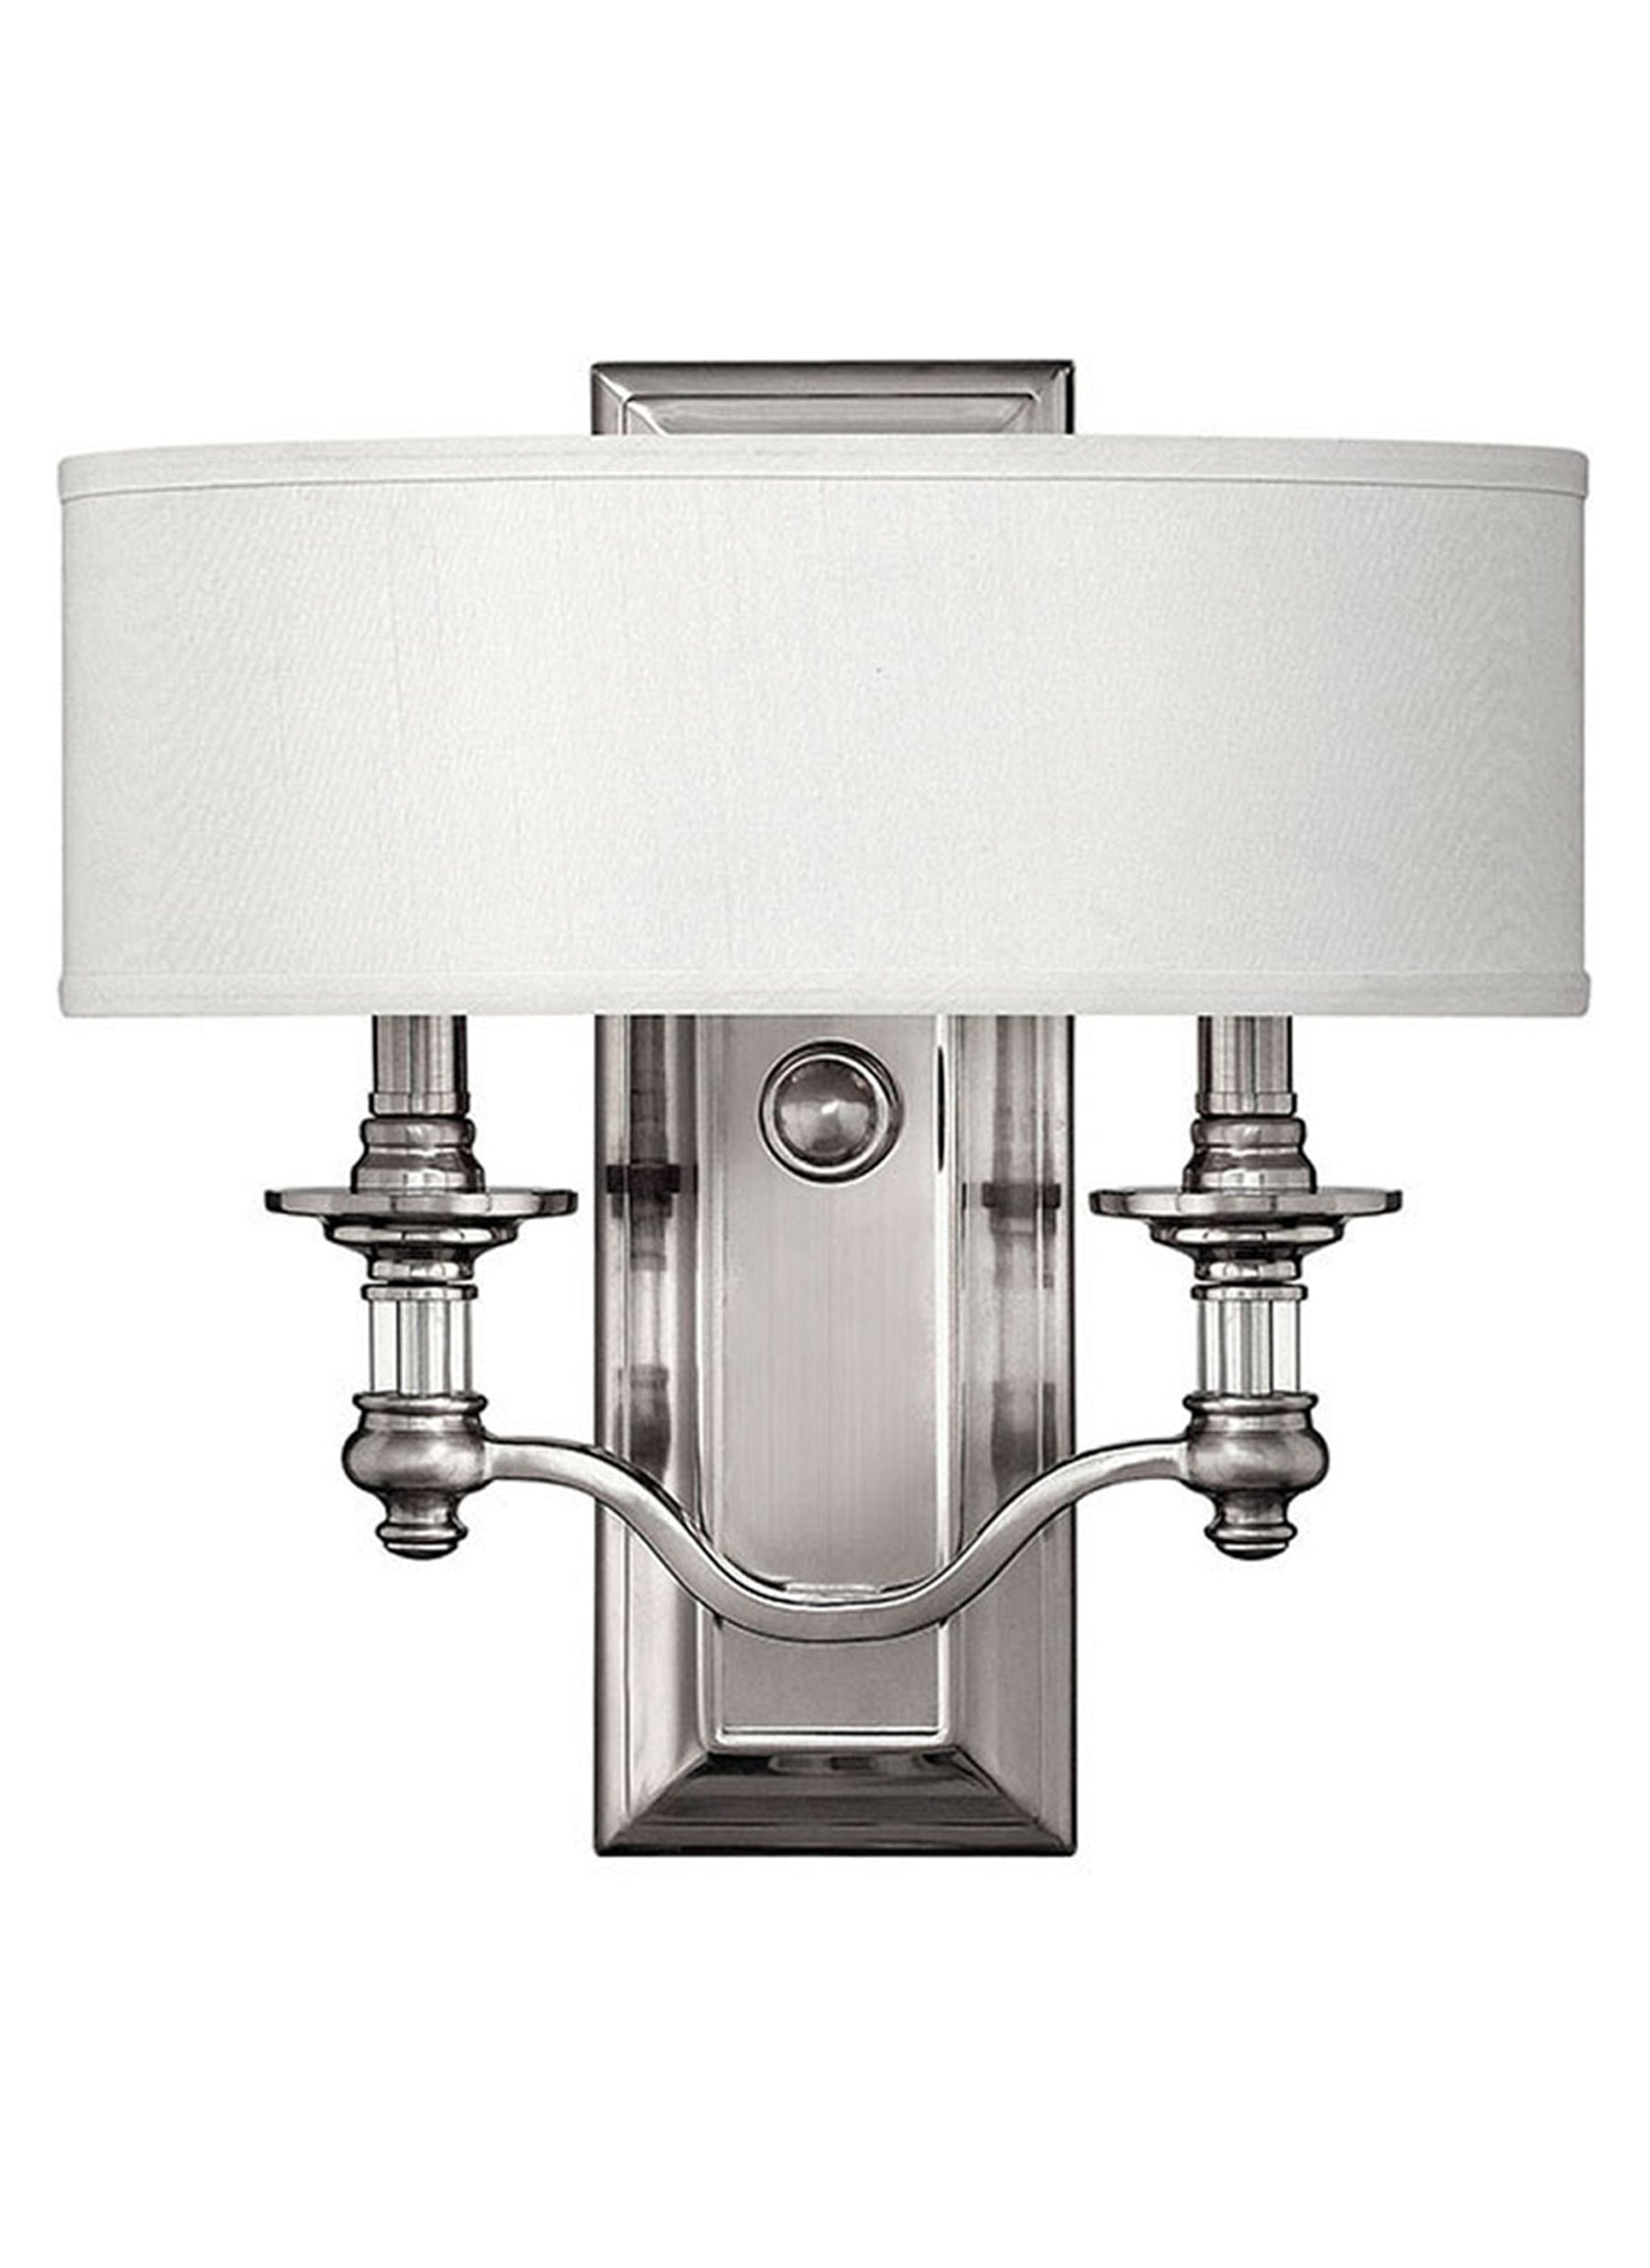 Sussex 2L wall sconce - 4900BN